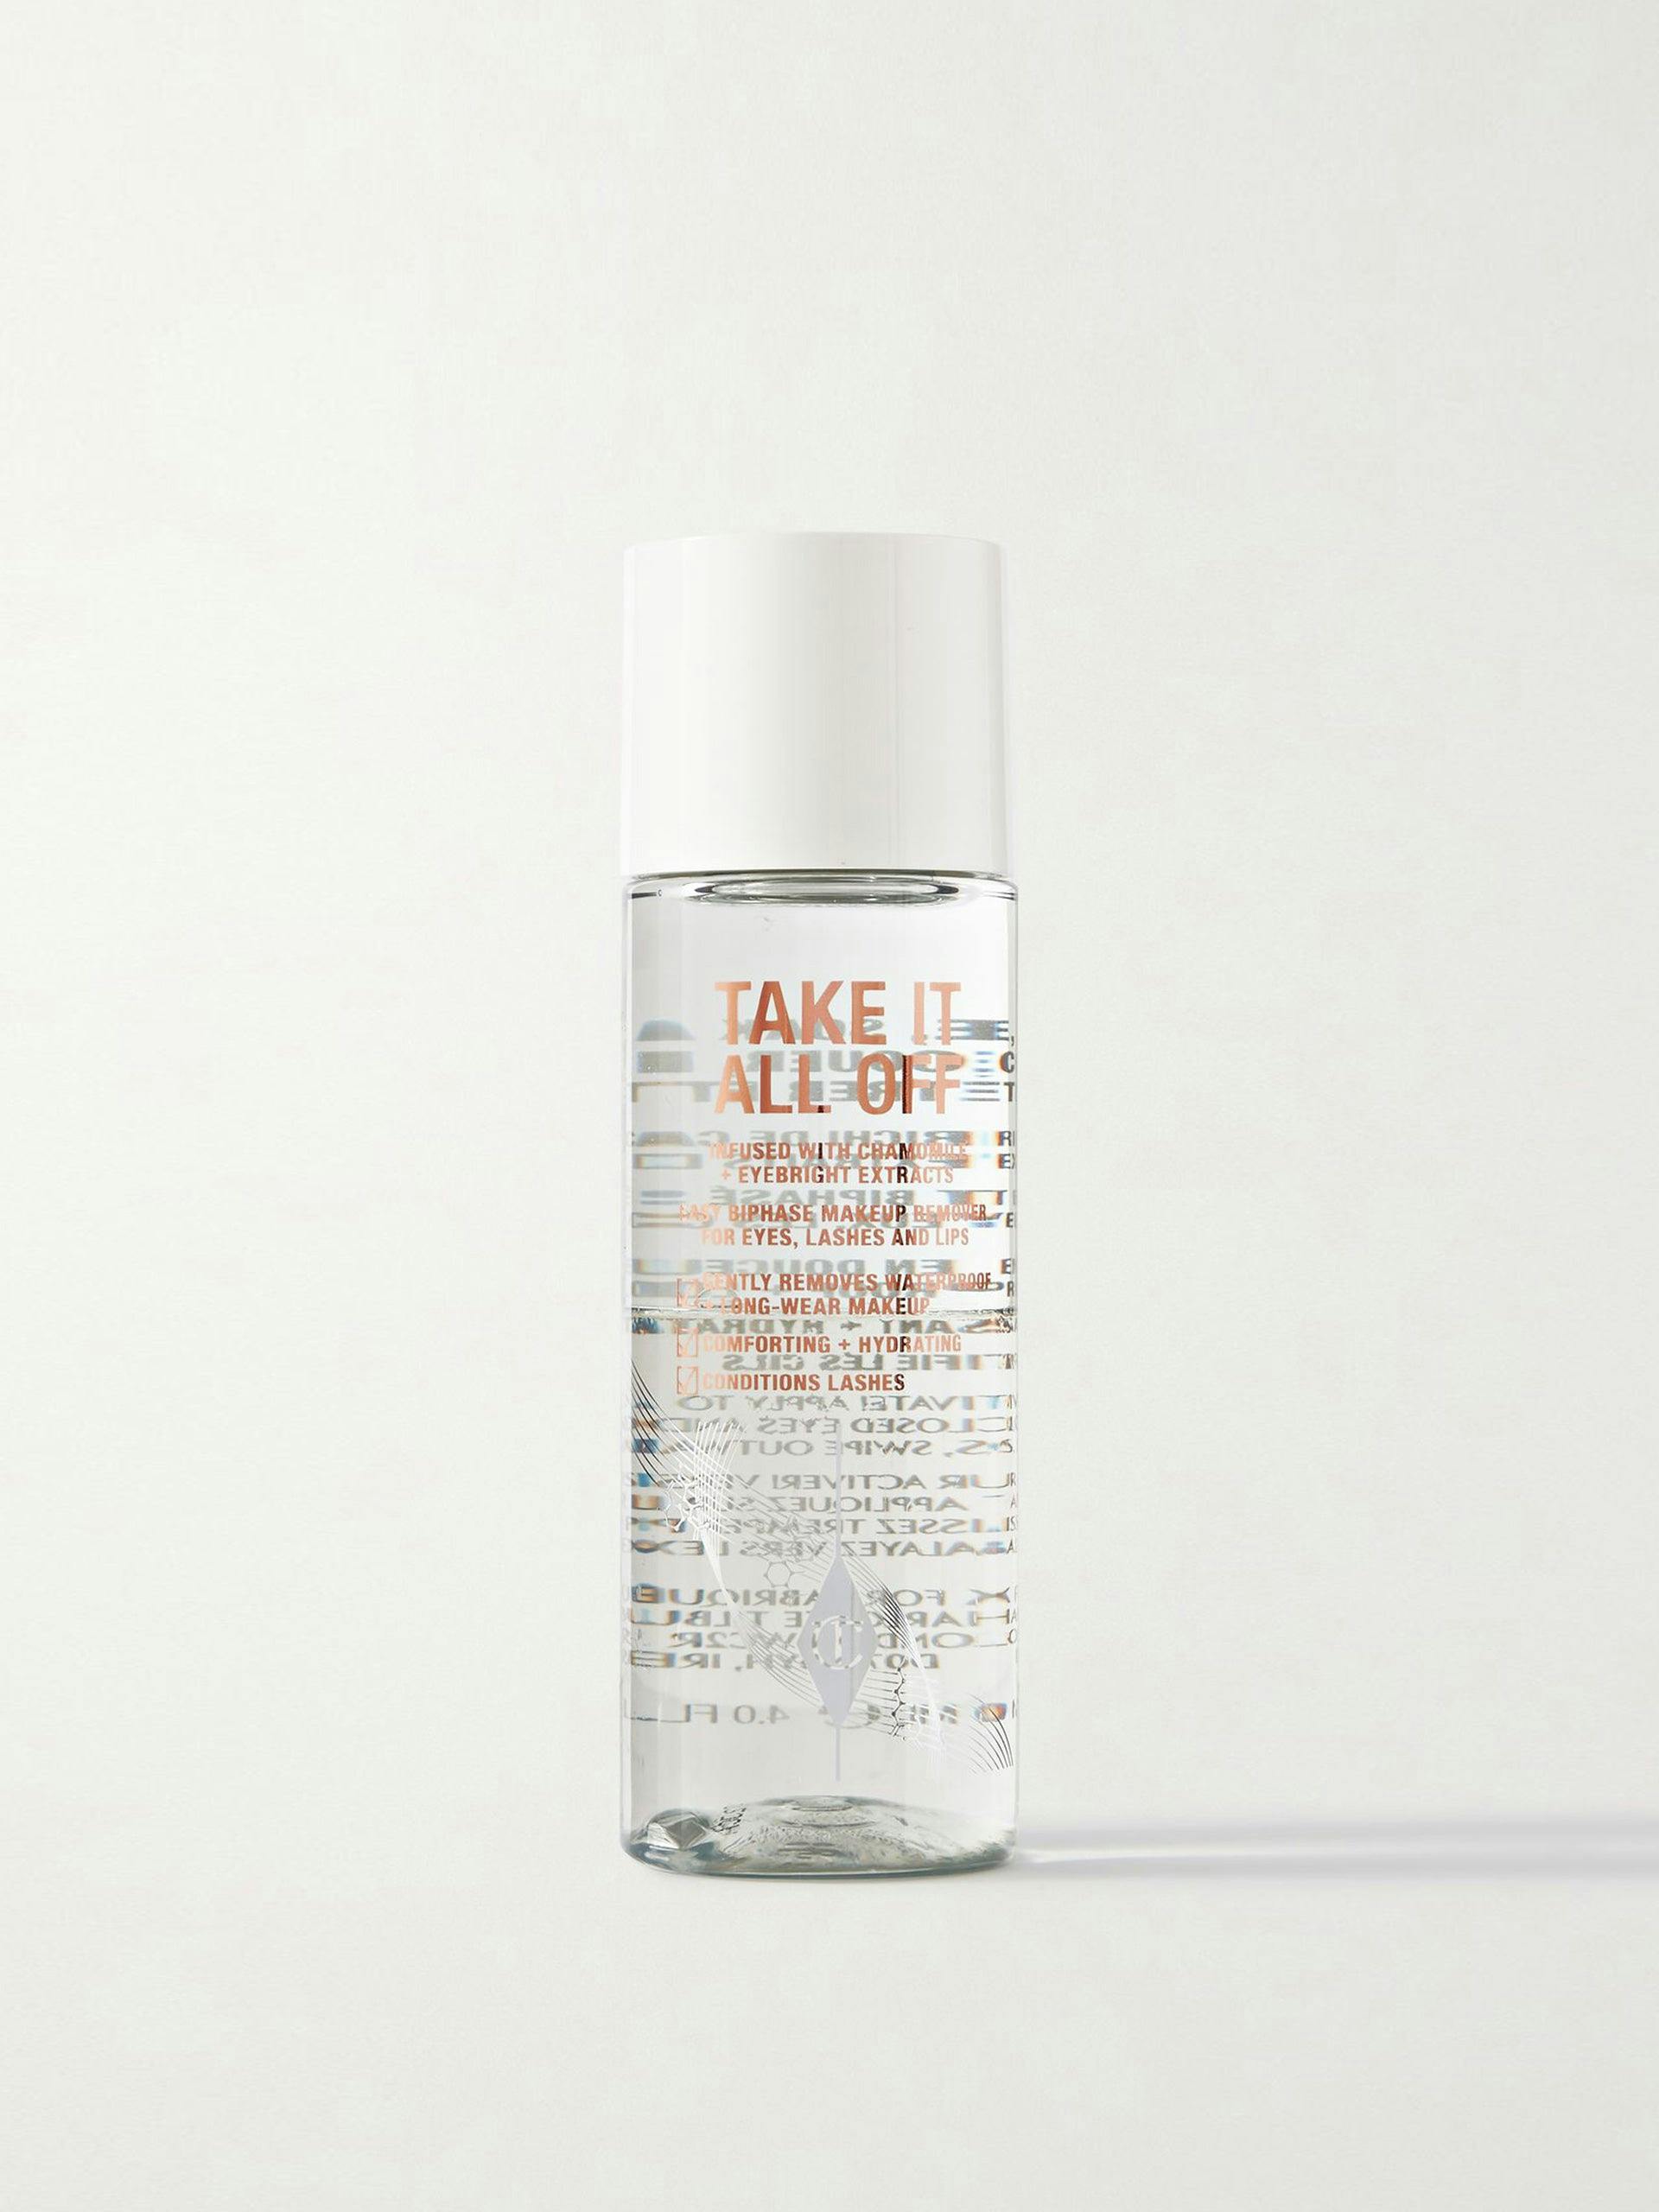 Take It All Off make-up remover